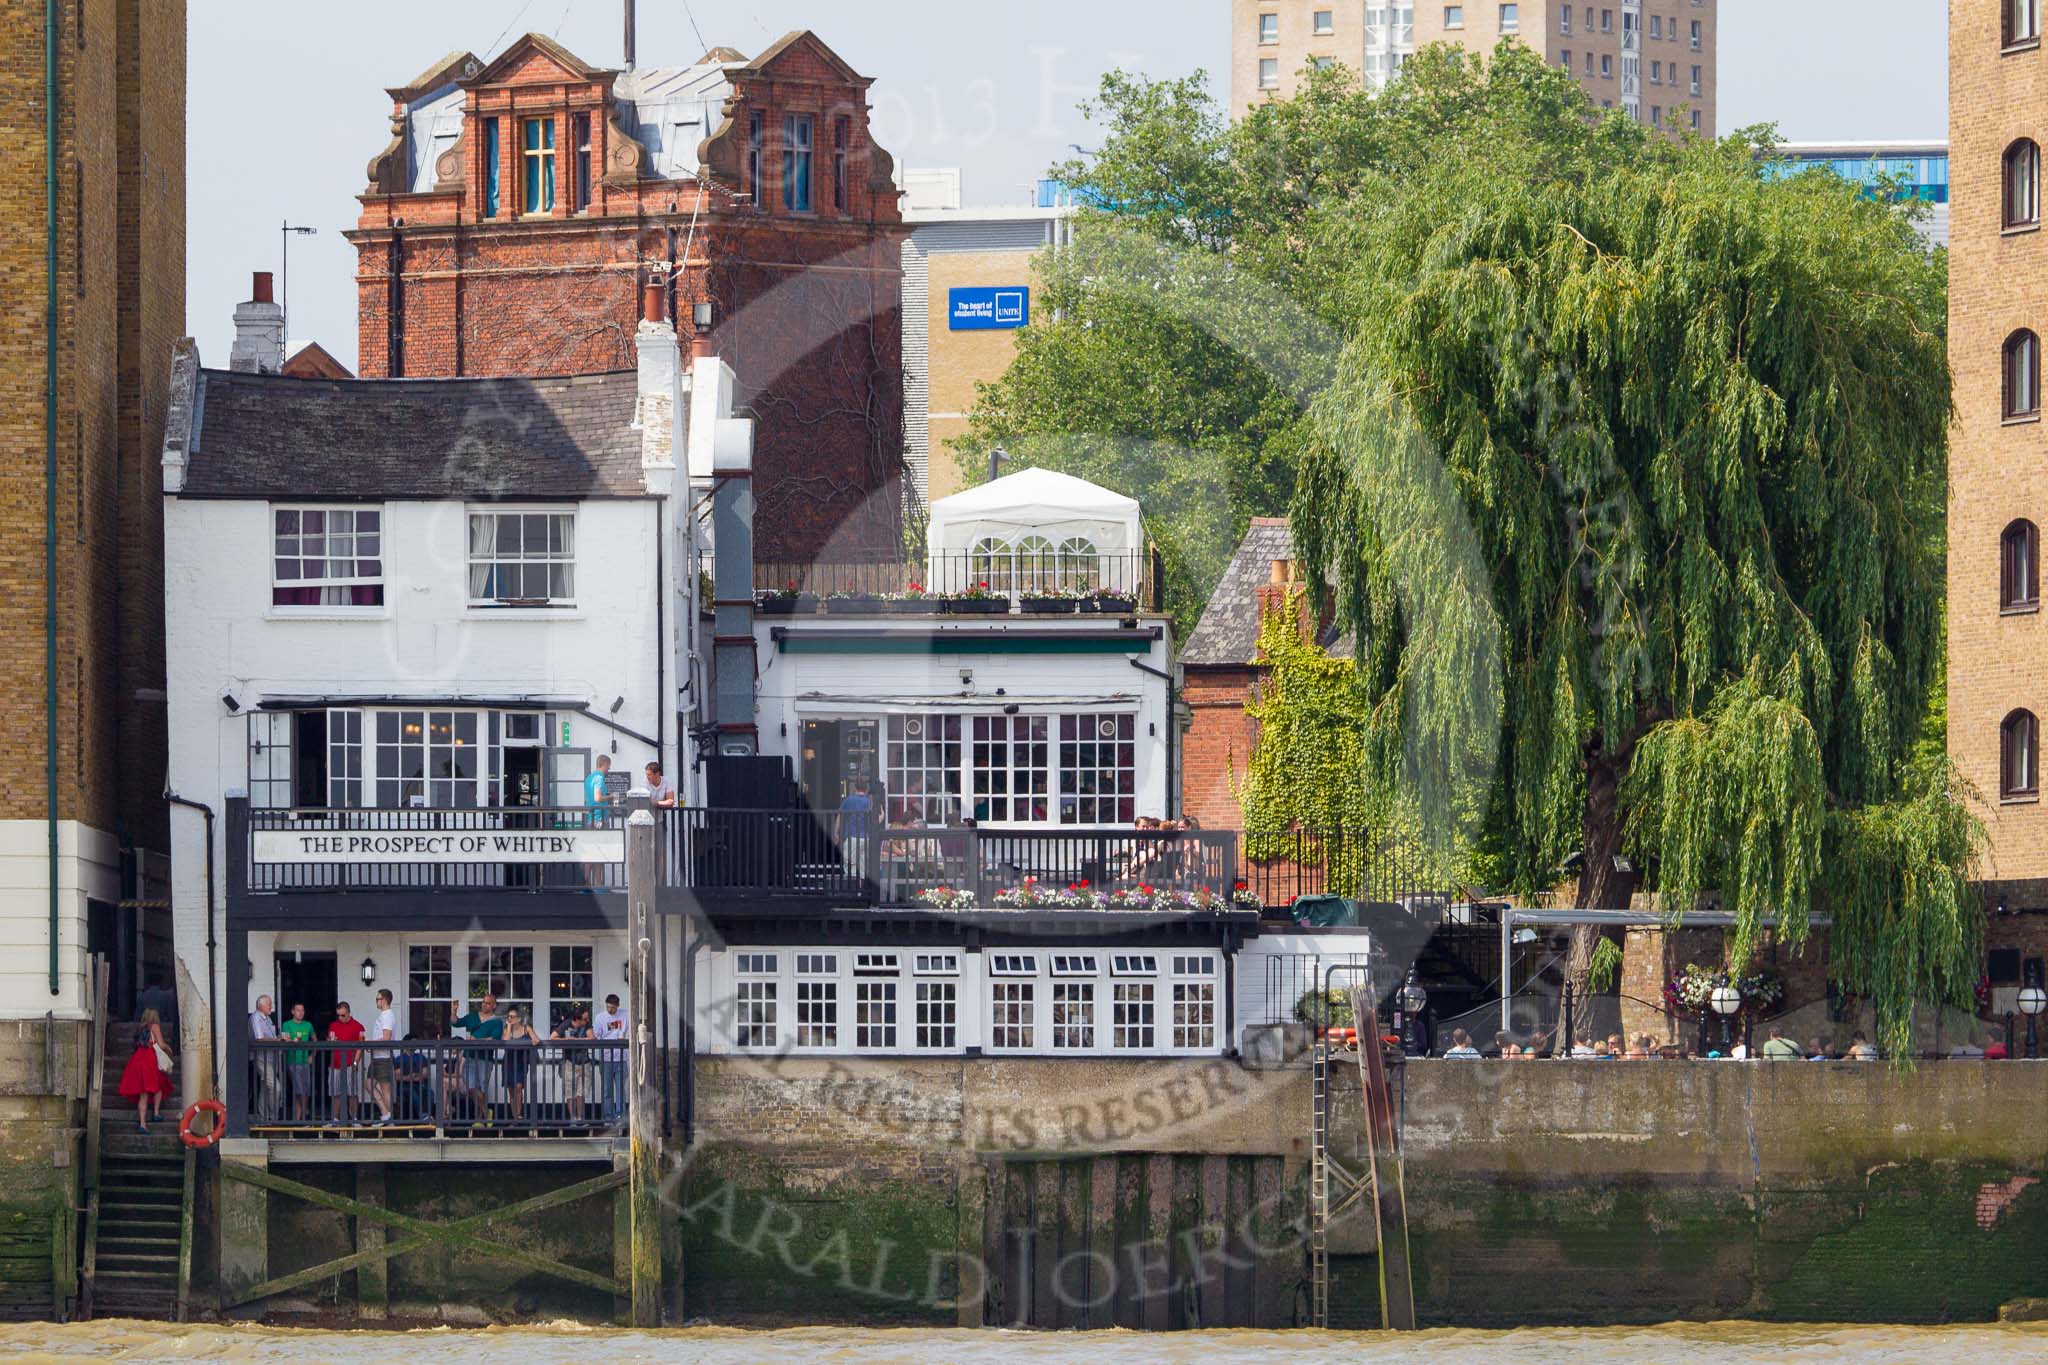 TOW River Thames Barge Driving Race 2013: Said to be the oldest riverside tavern: The Prospect of Whitby public house at Wapping Wall, London E1W, seen from the river..
River Thames between Greenwich and Westminster,
London,

United Kingdom,
on 13 July 2013 at 15:08, image #549